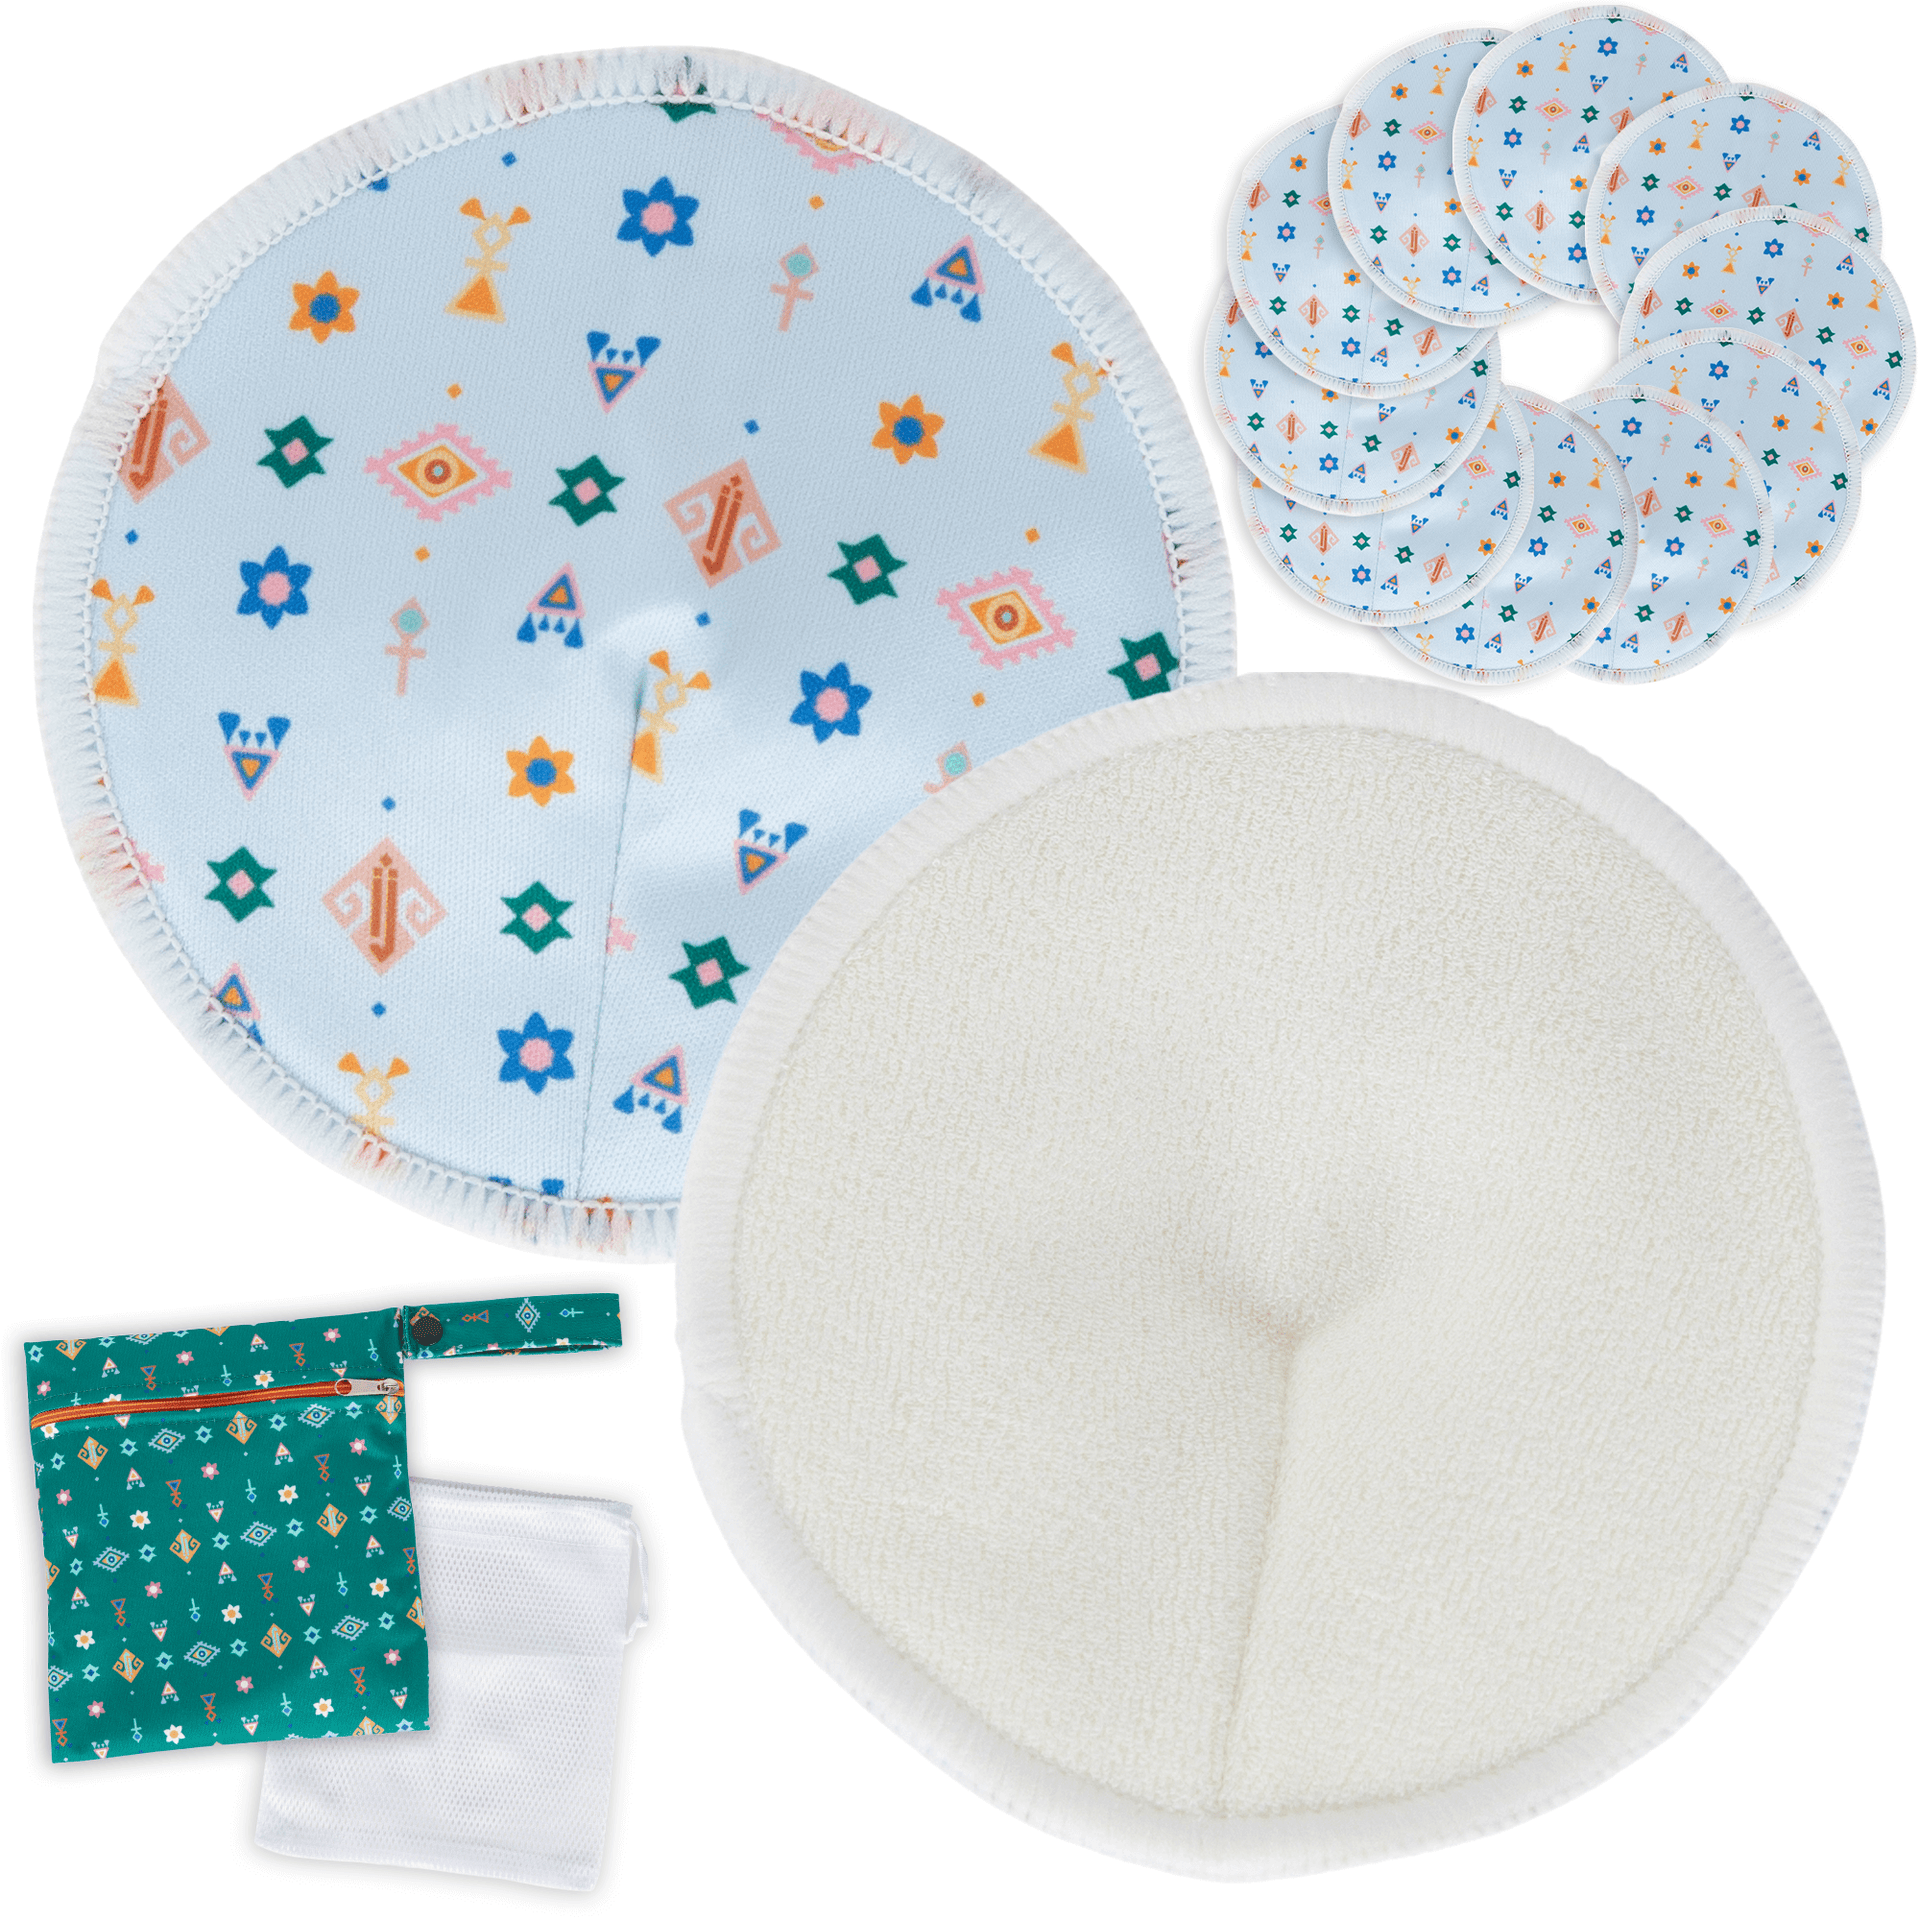 Ultra Absorbent Nursing Pads, the Best Nursing Pads to Keep You